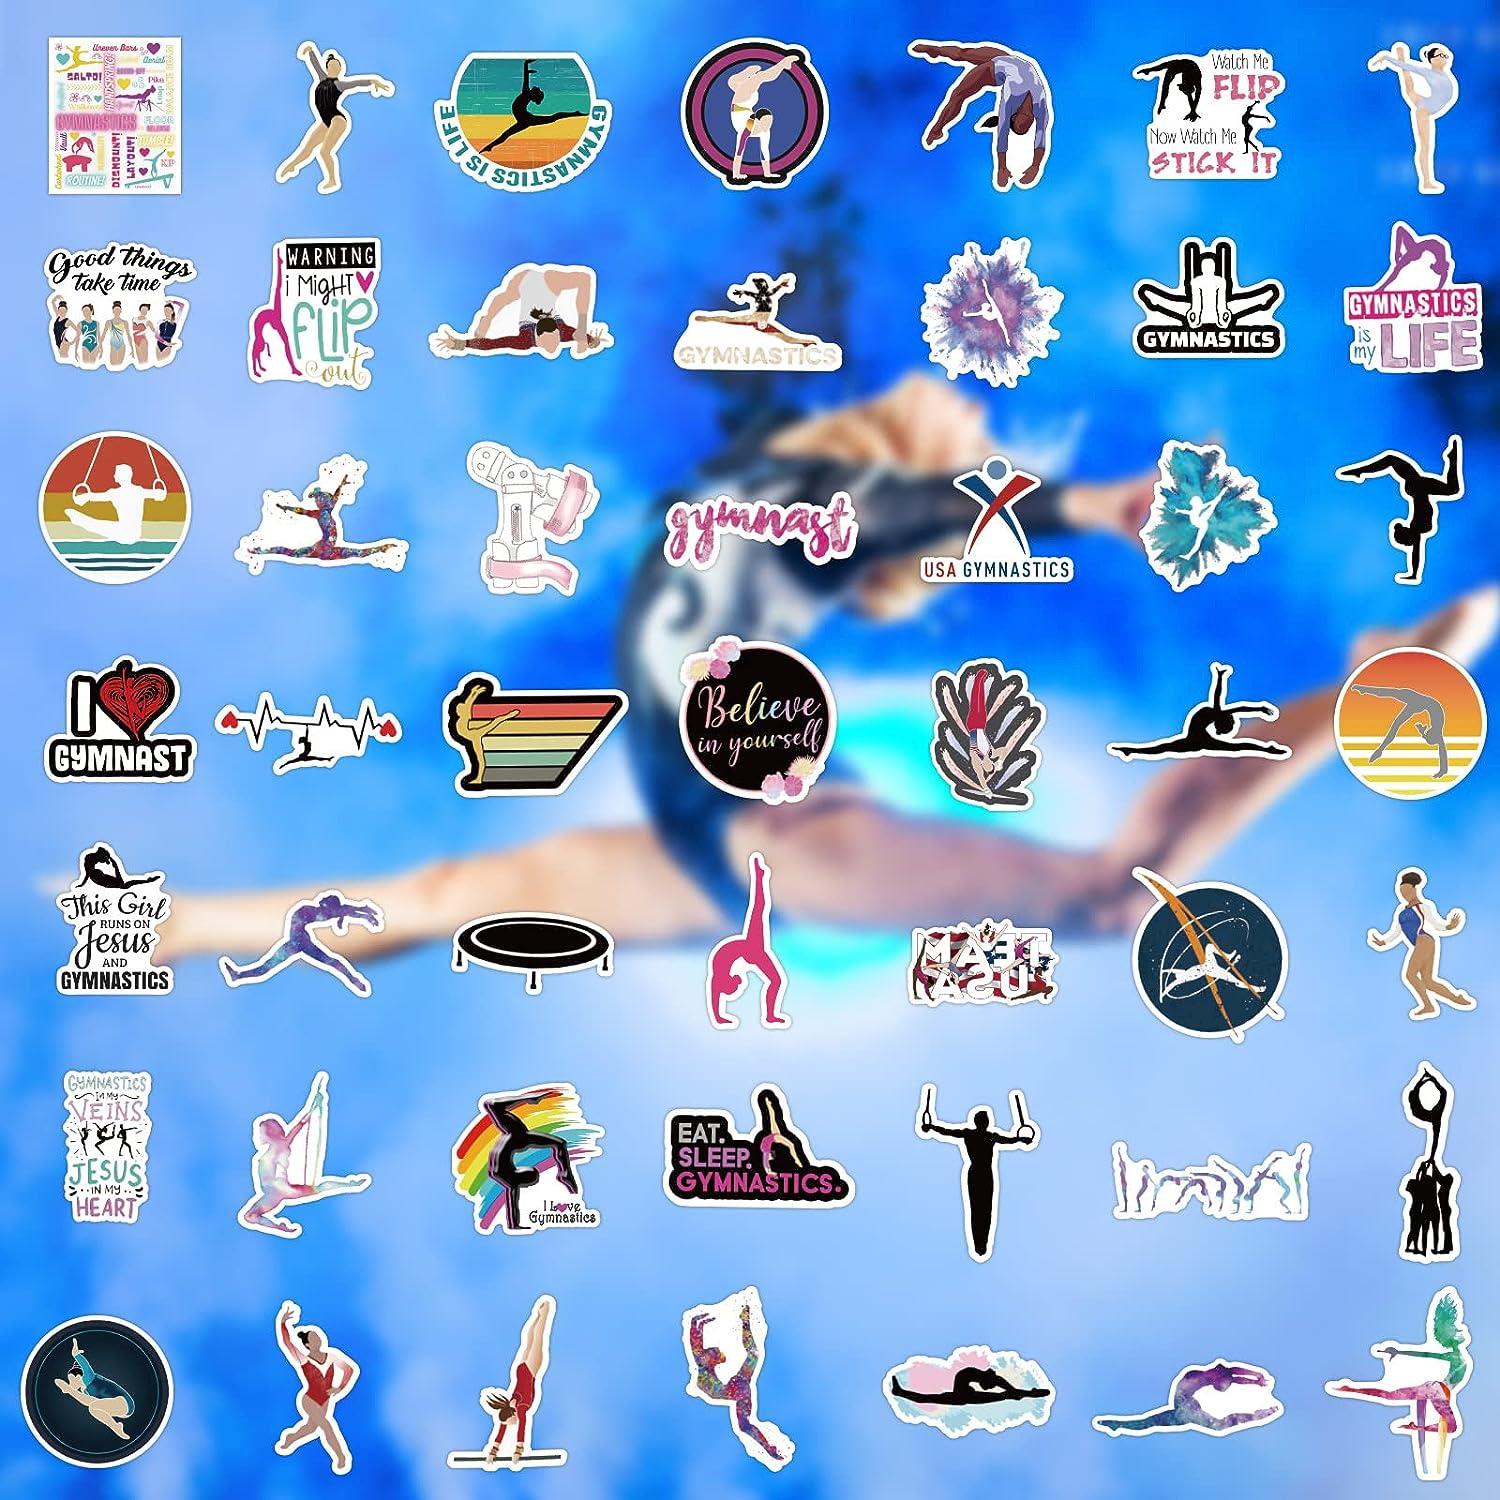 Gymnastics Stickers, Perfect Gymnastics Gifts for Girls, Anywhere You Need  Gymnastics Decals, Laptop Stickers, Water Bottles, Waterproof Durable 100%